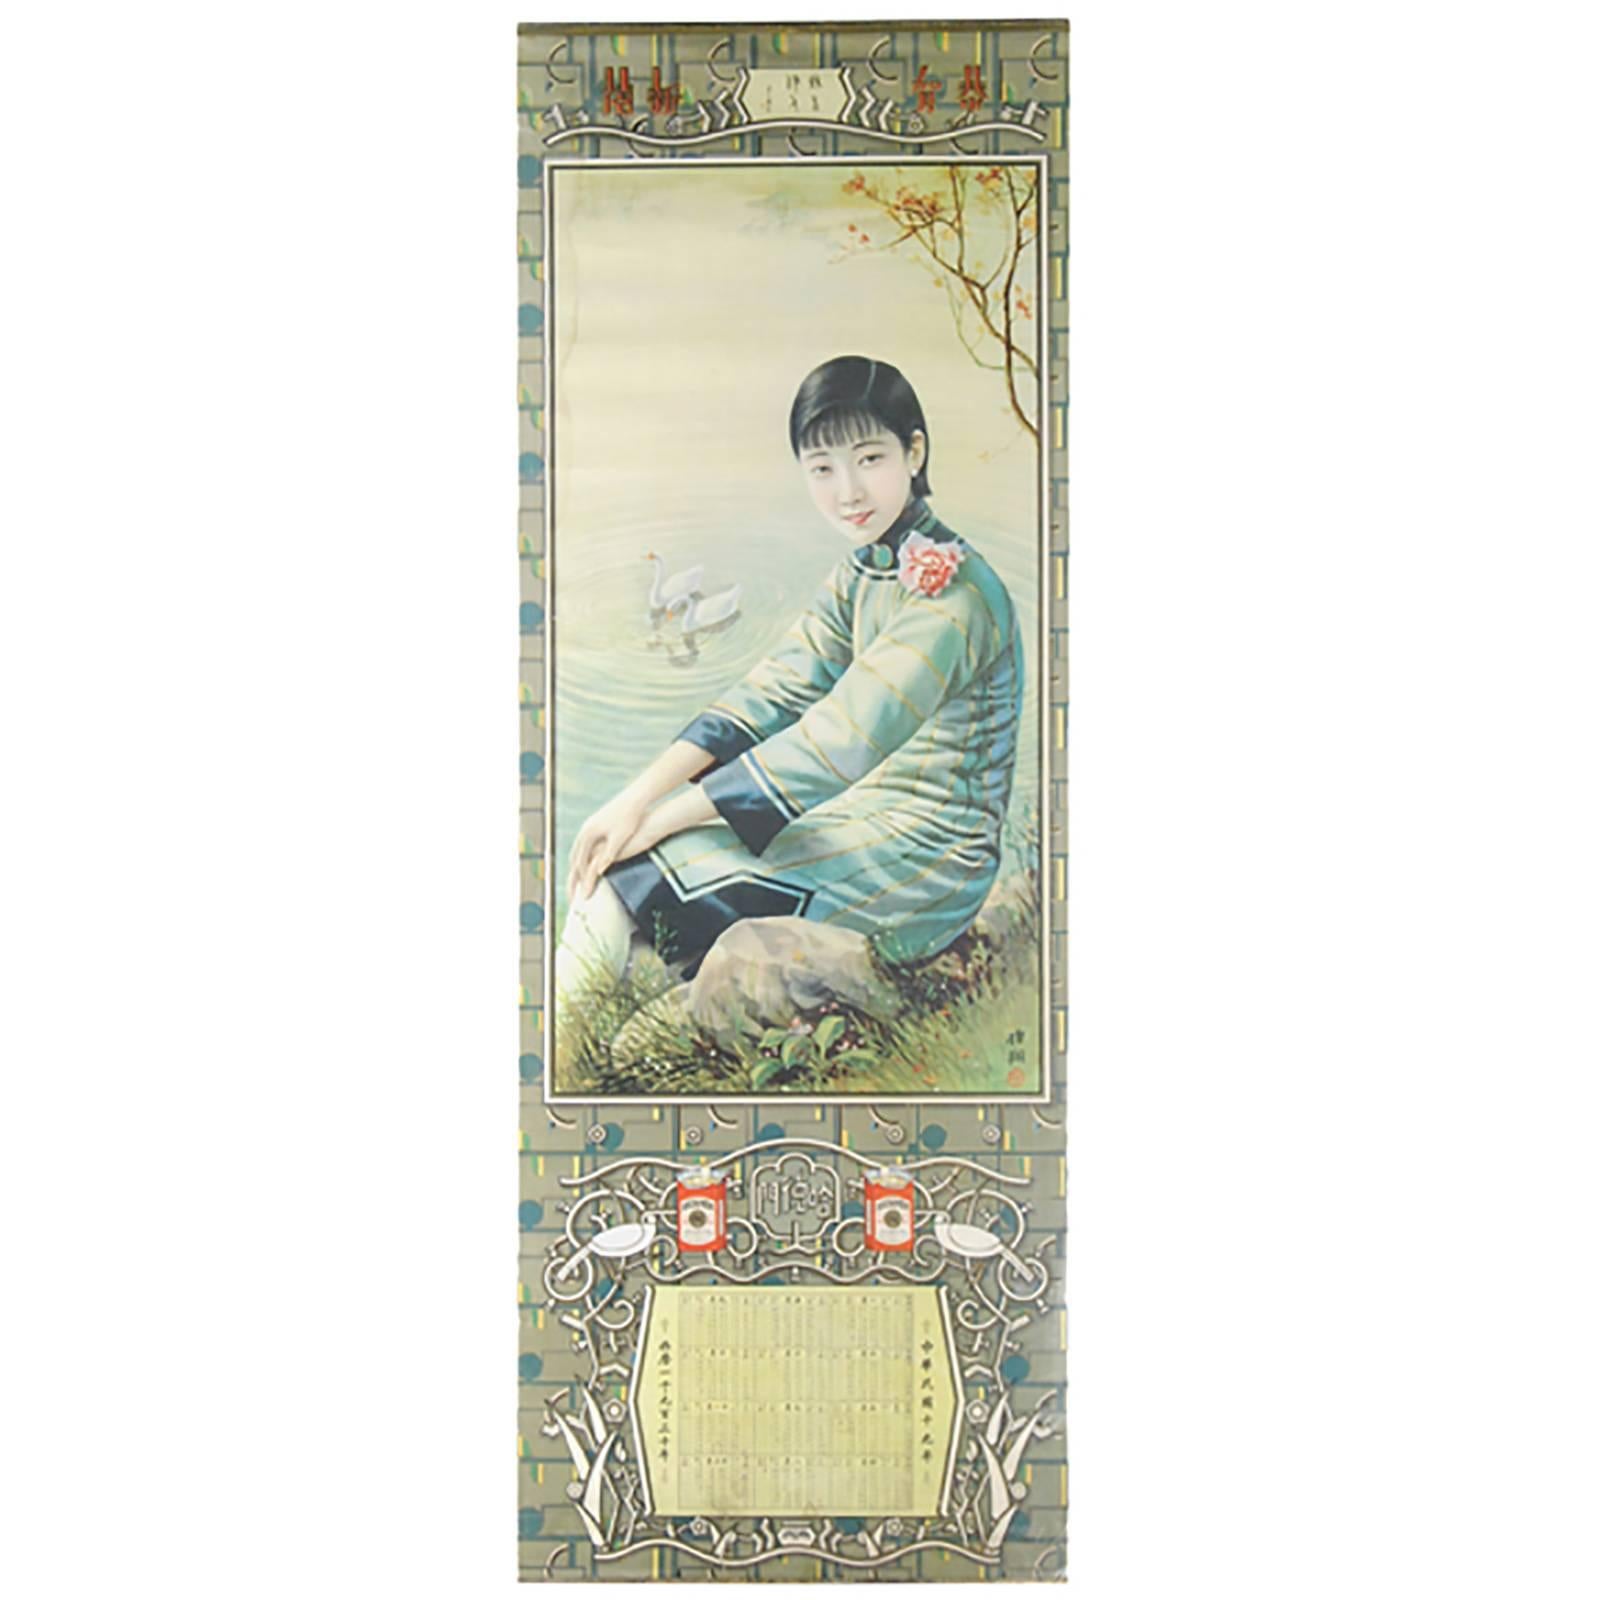 Vintage Chinese Advertisement Poster